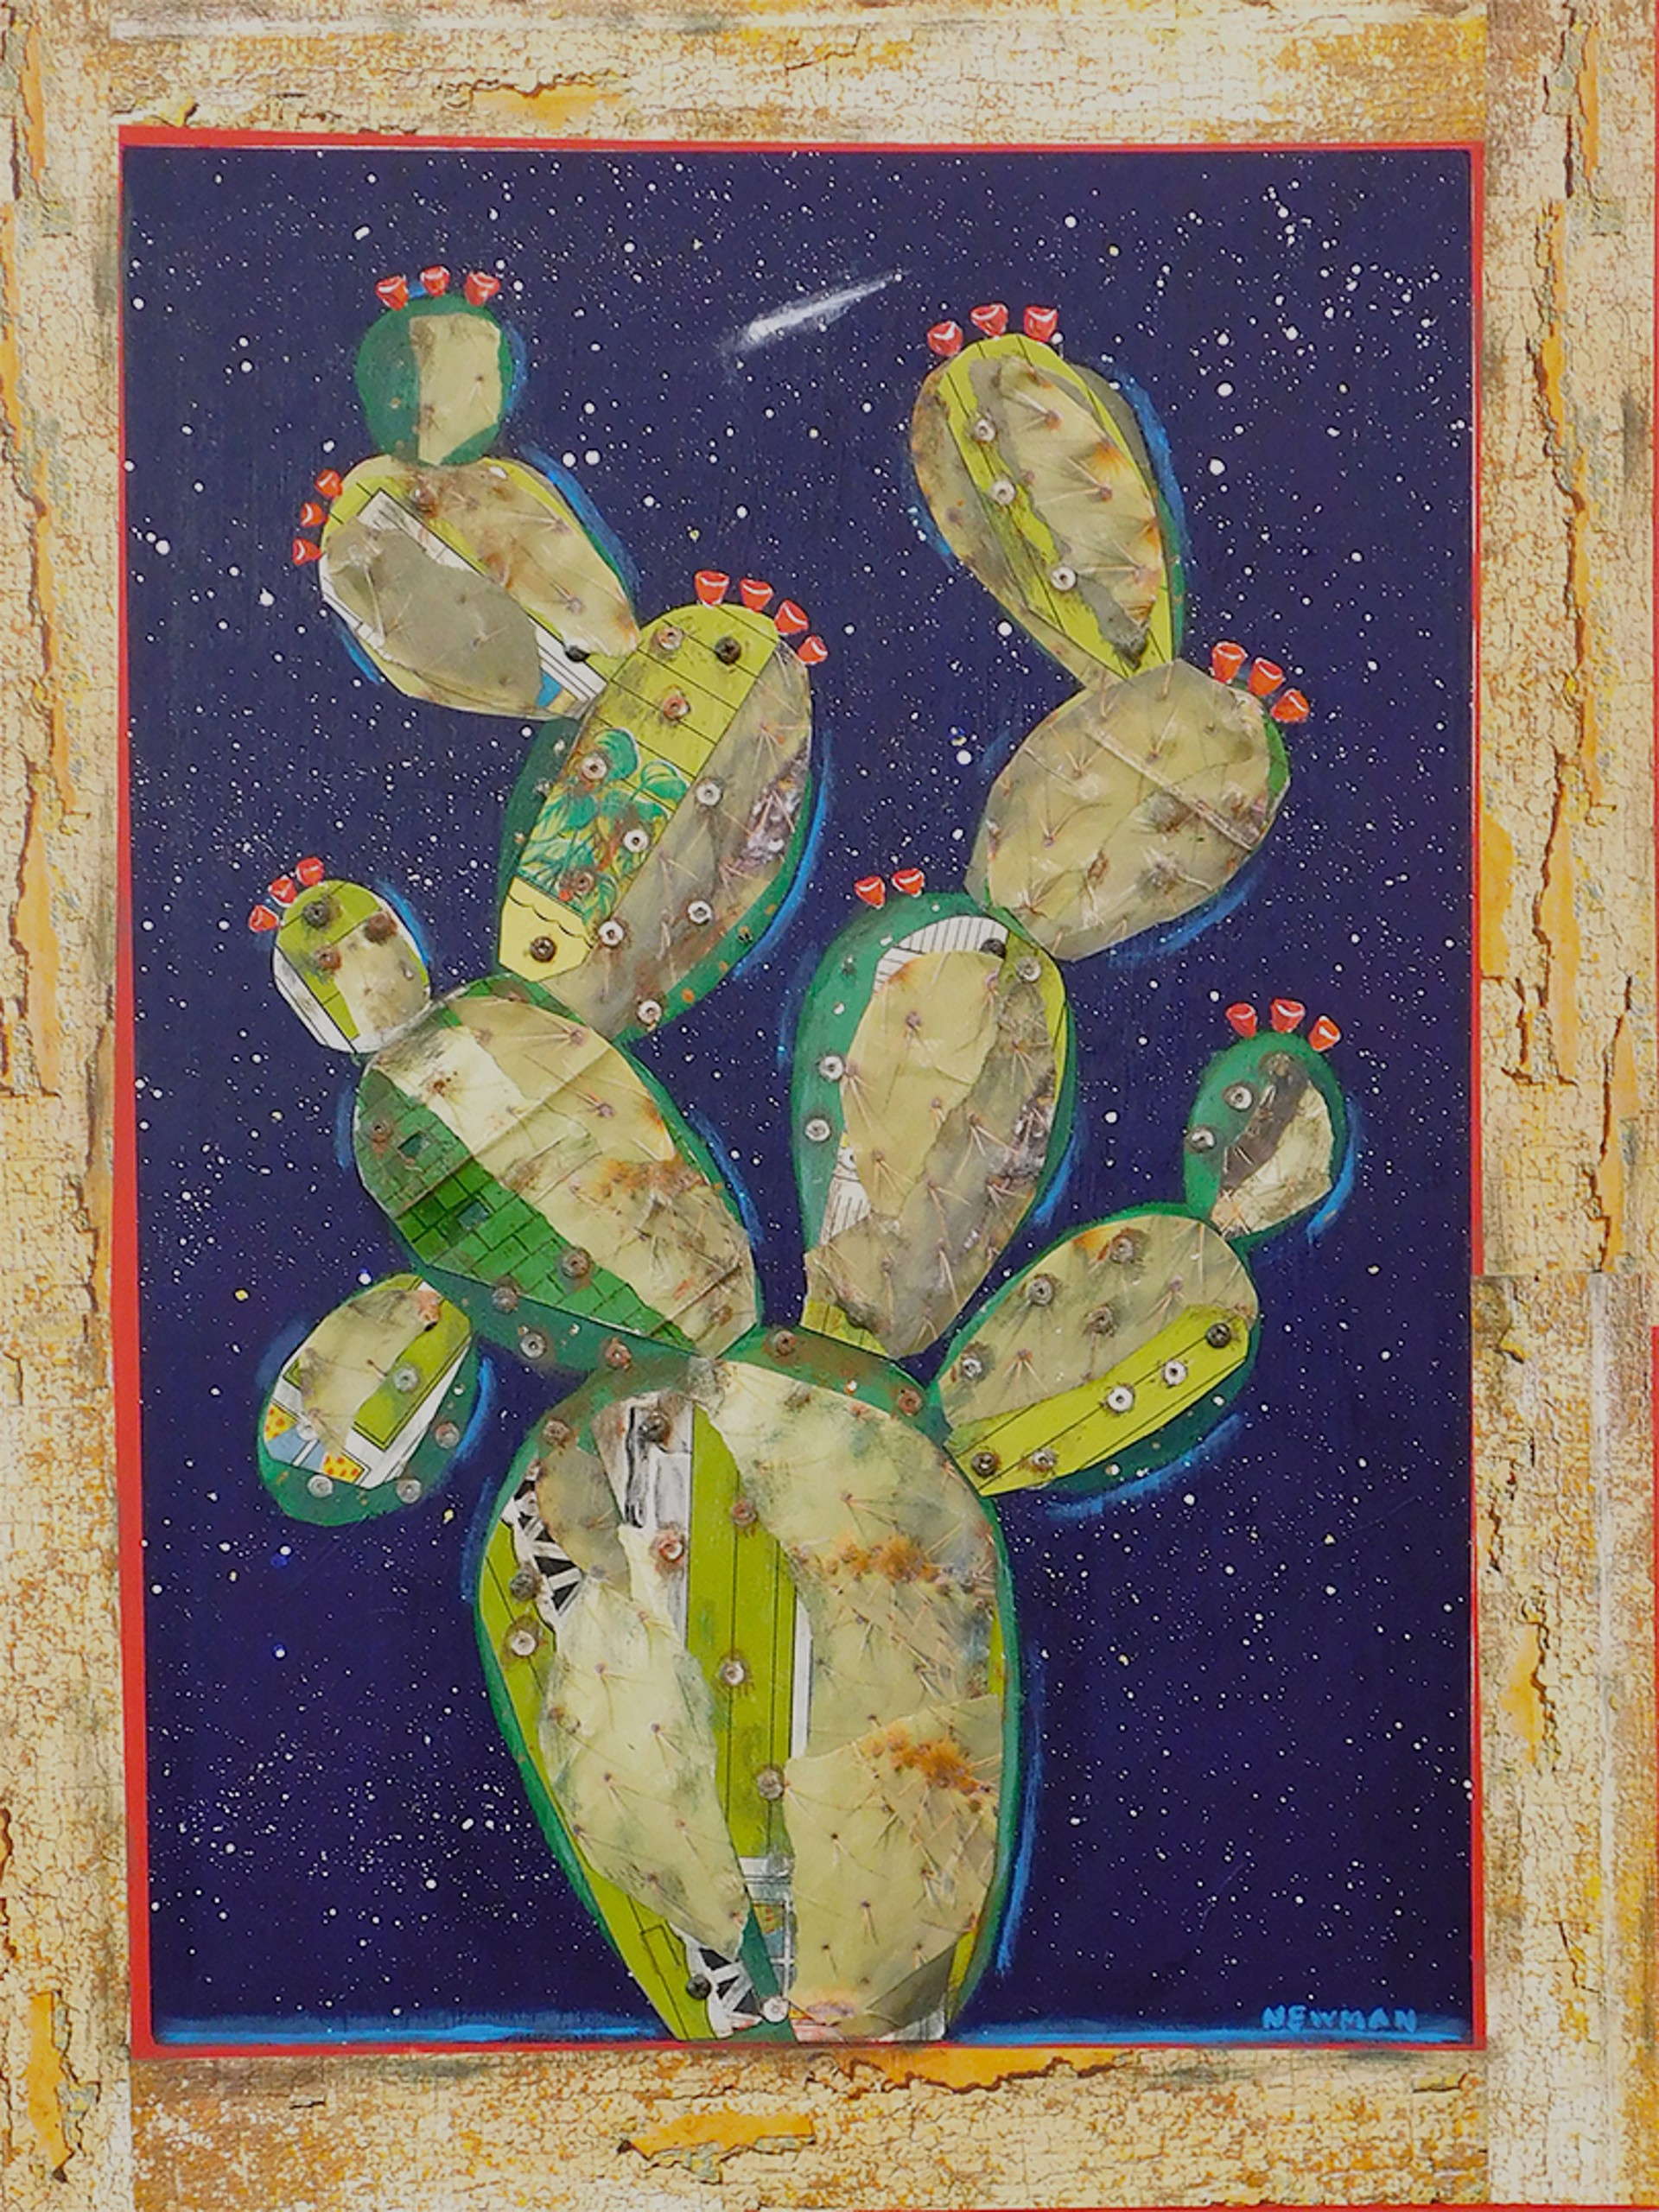 Prickly Pear Series by Dave Newman